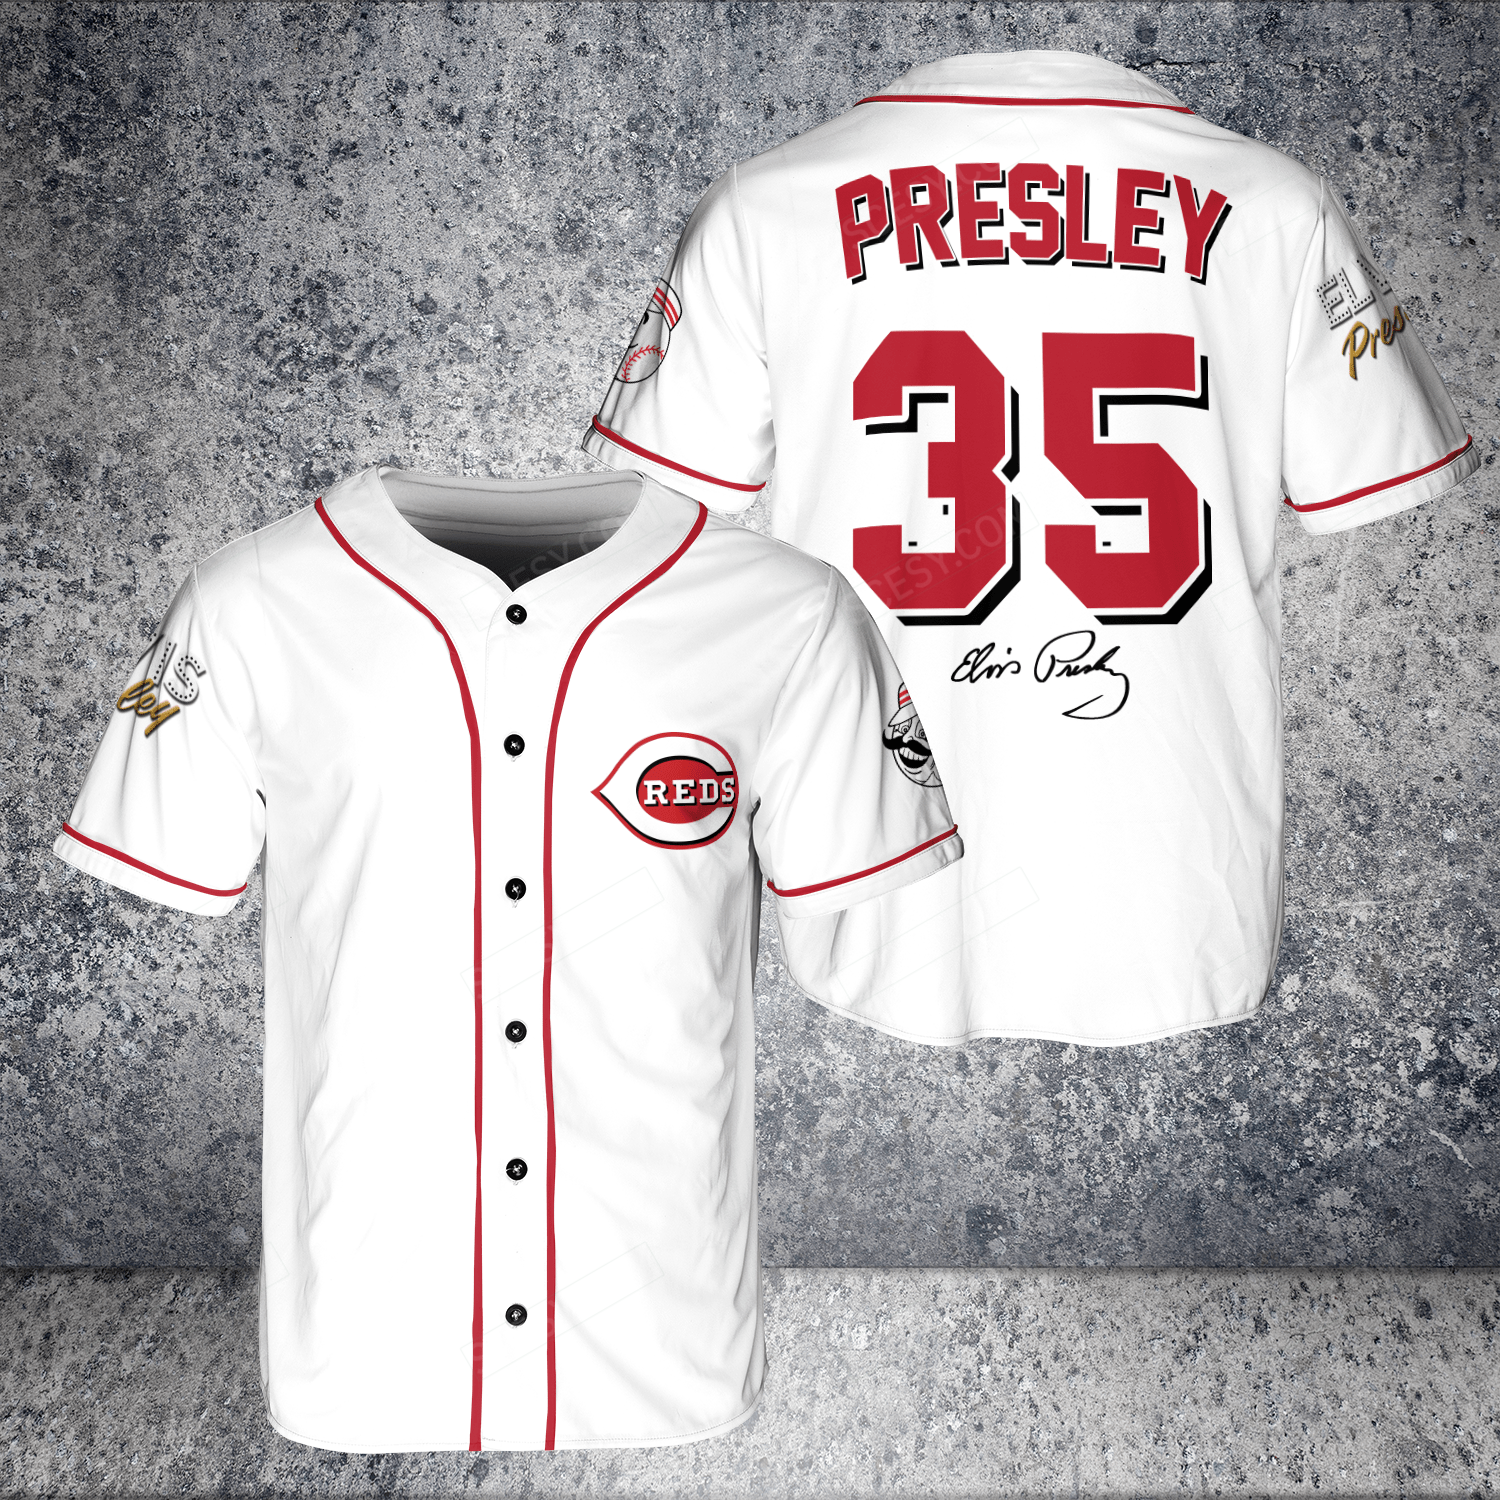 Limited Edition Elvis Presley Reds Jersey - Get Yours Now! - Scesy